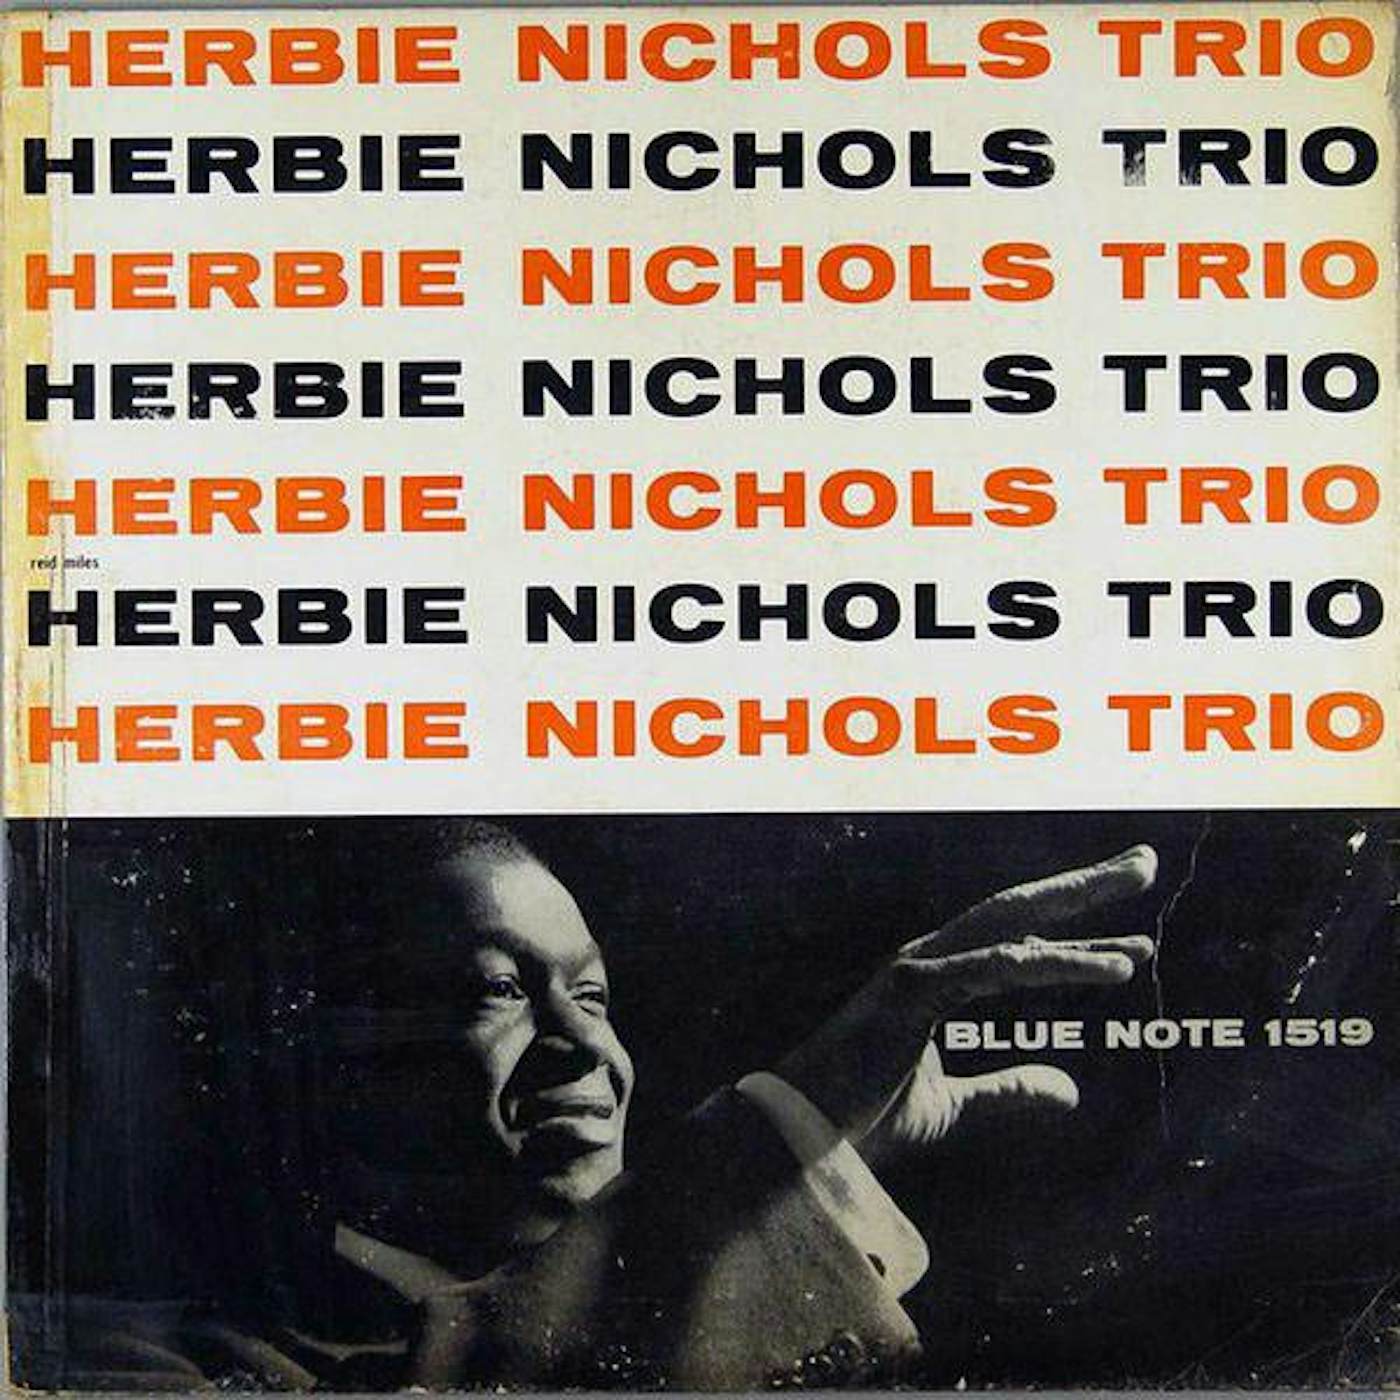 HERBIE NICHOLS TRIO (UHQCD) (BLUE NOTE 85TH ANNIVERSARY EDITION/REMASTERED BY KEVIN GRAY) CD